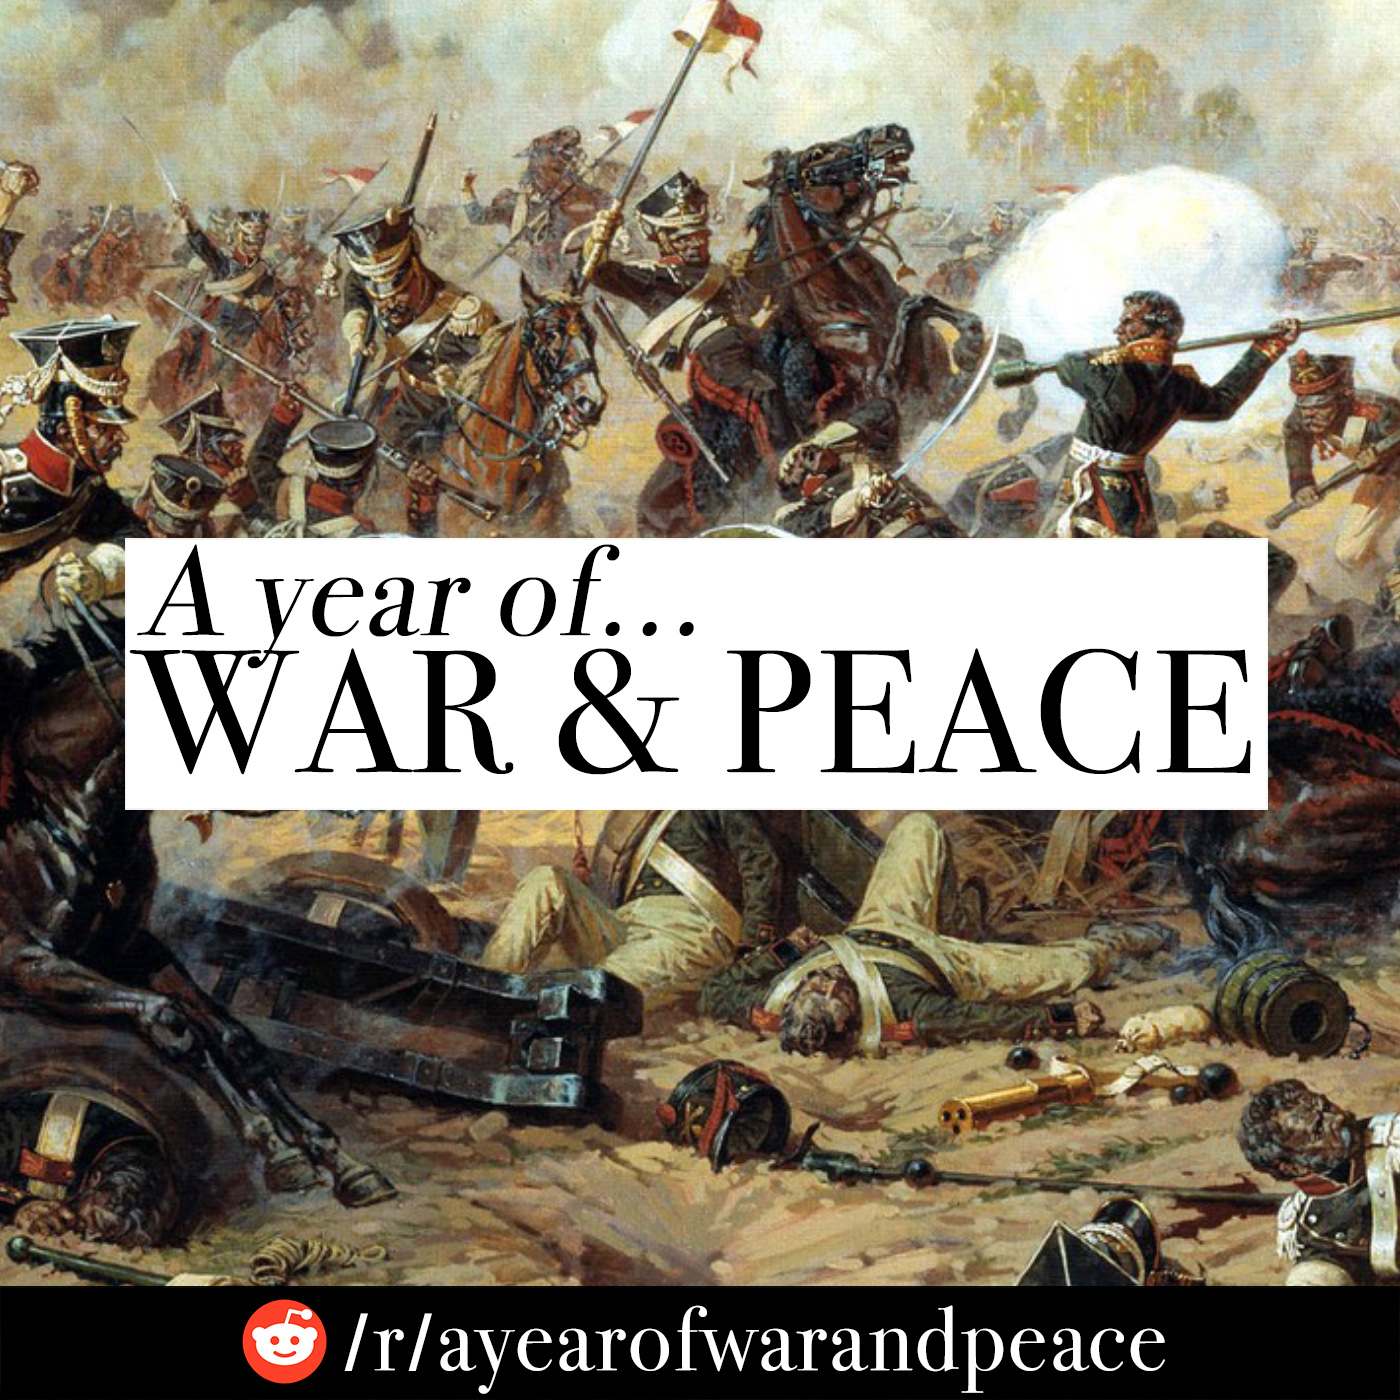 068 - Book 3, Chapter 19. War & Peace Audiobook and Discussion